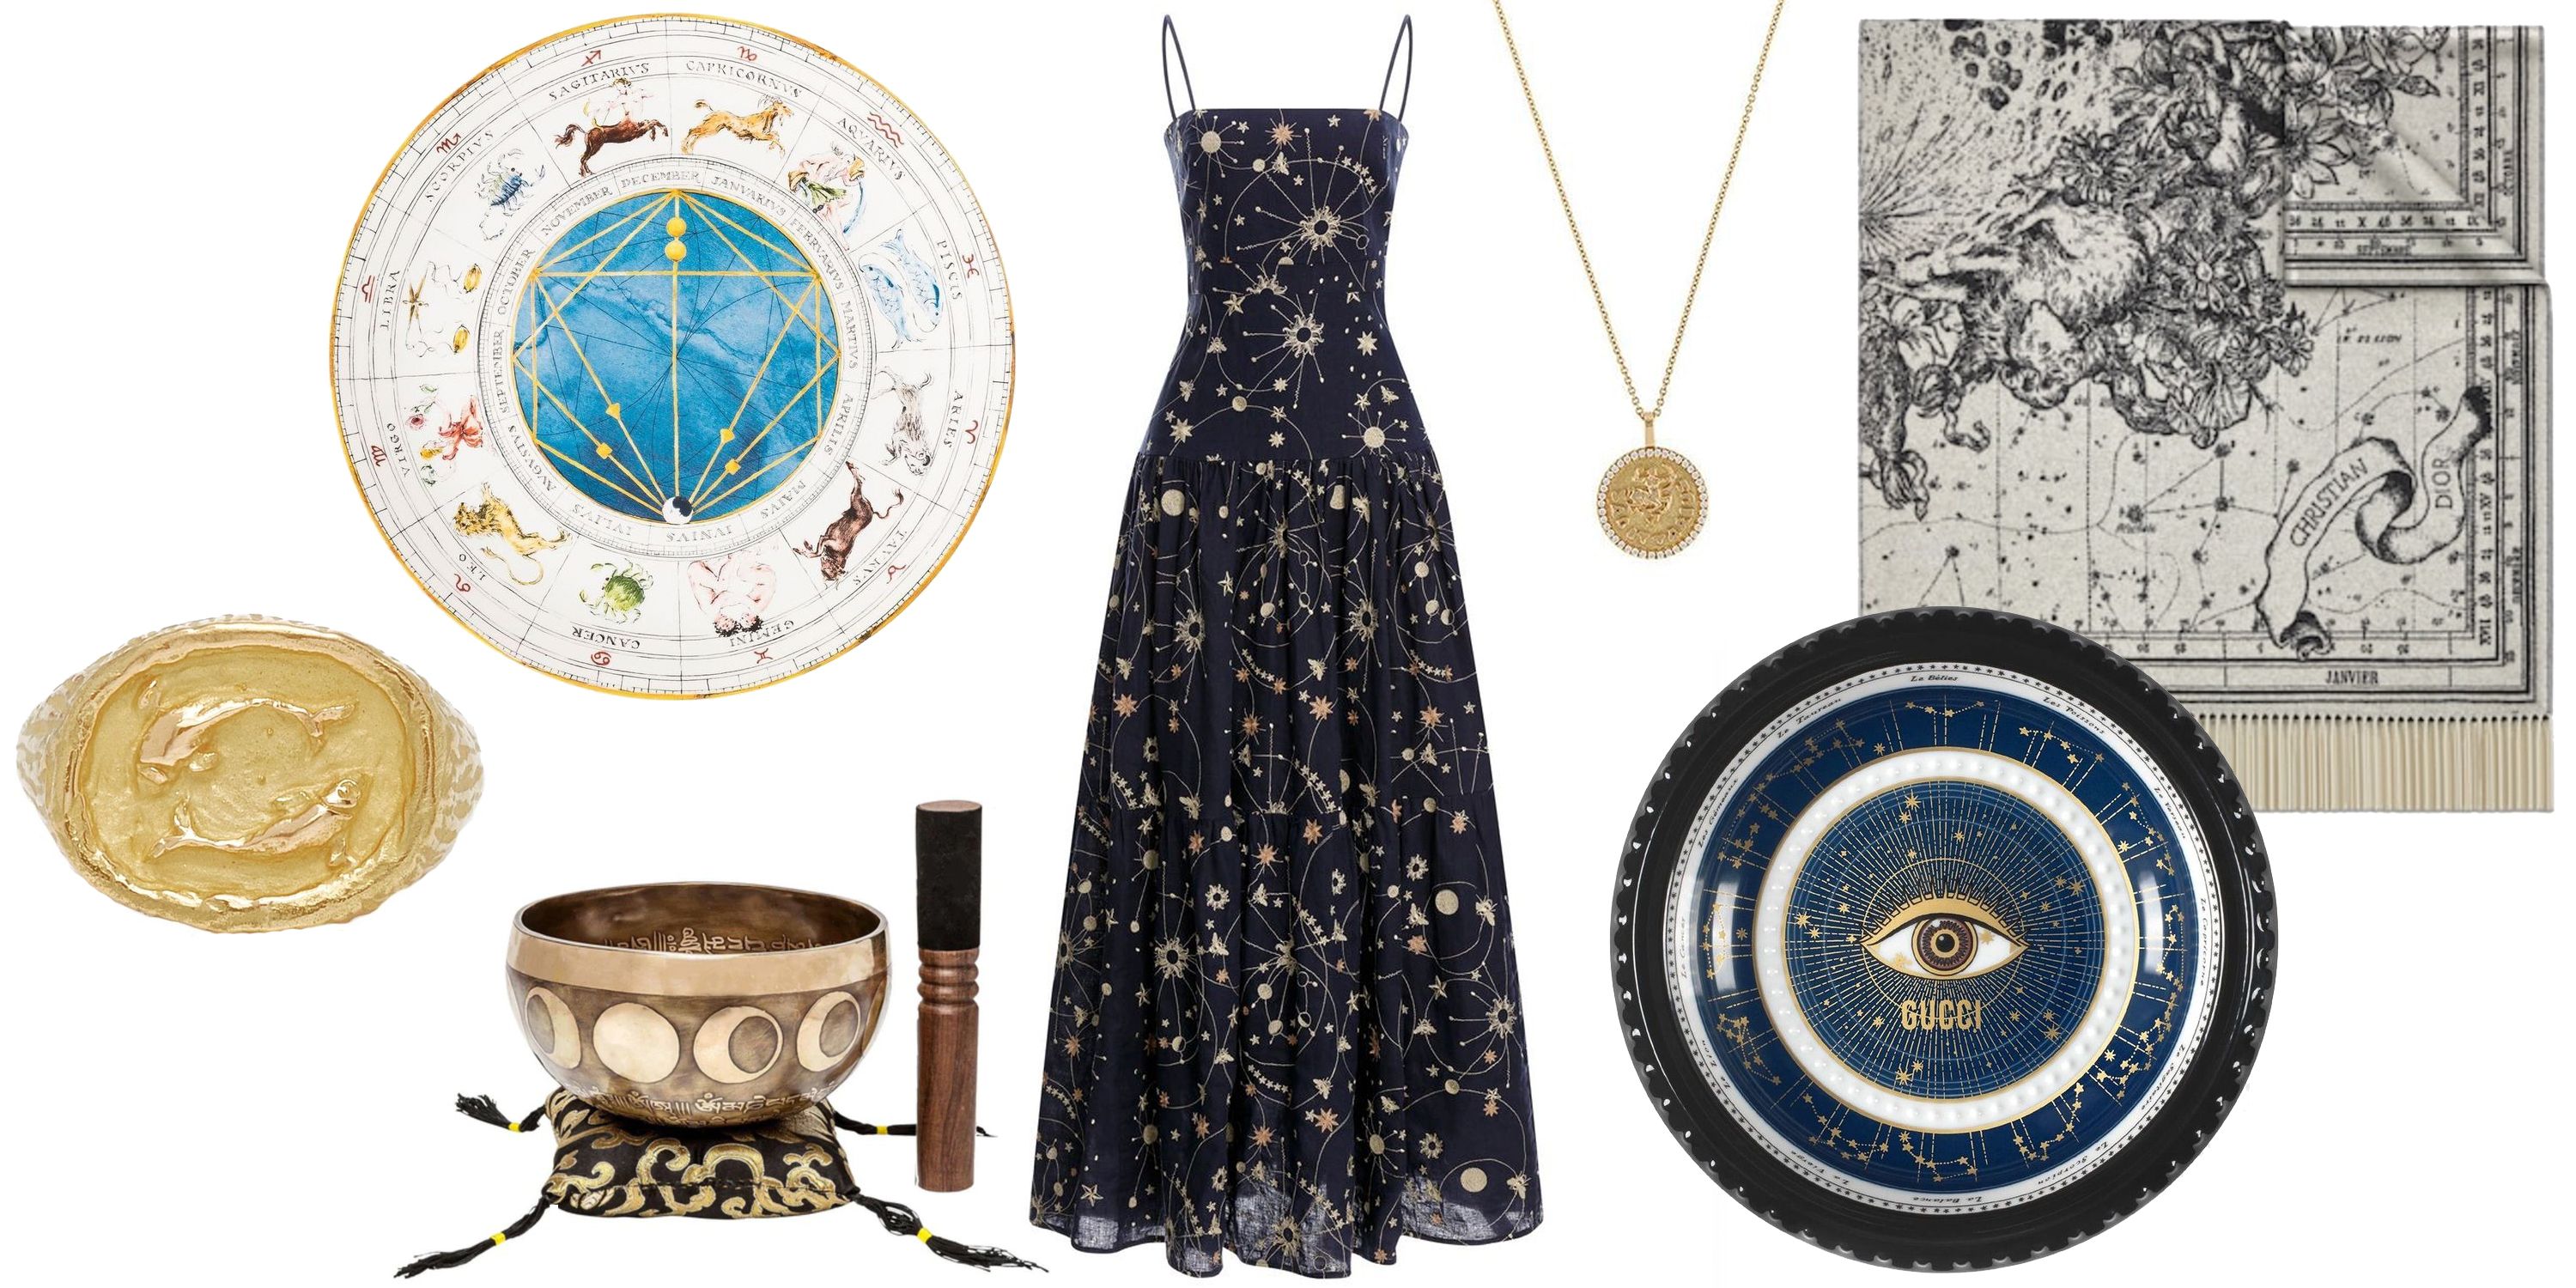 Suit Her Star Style: The Zodiac Gift Guide